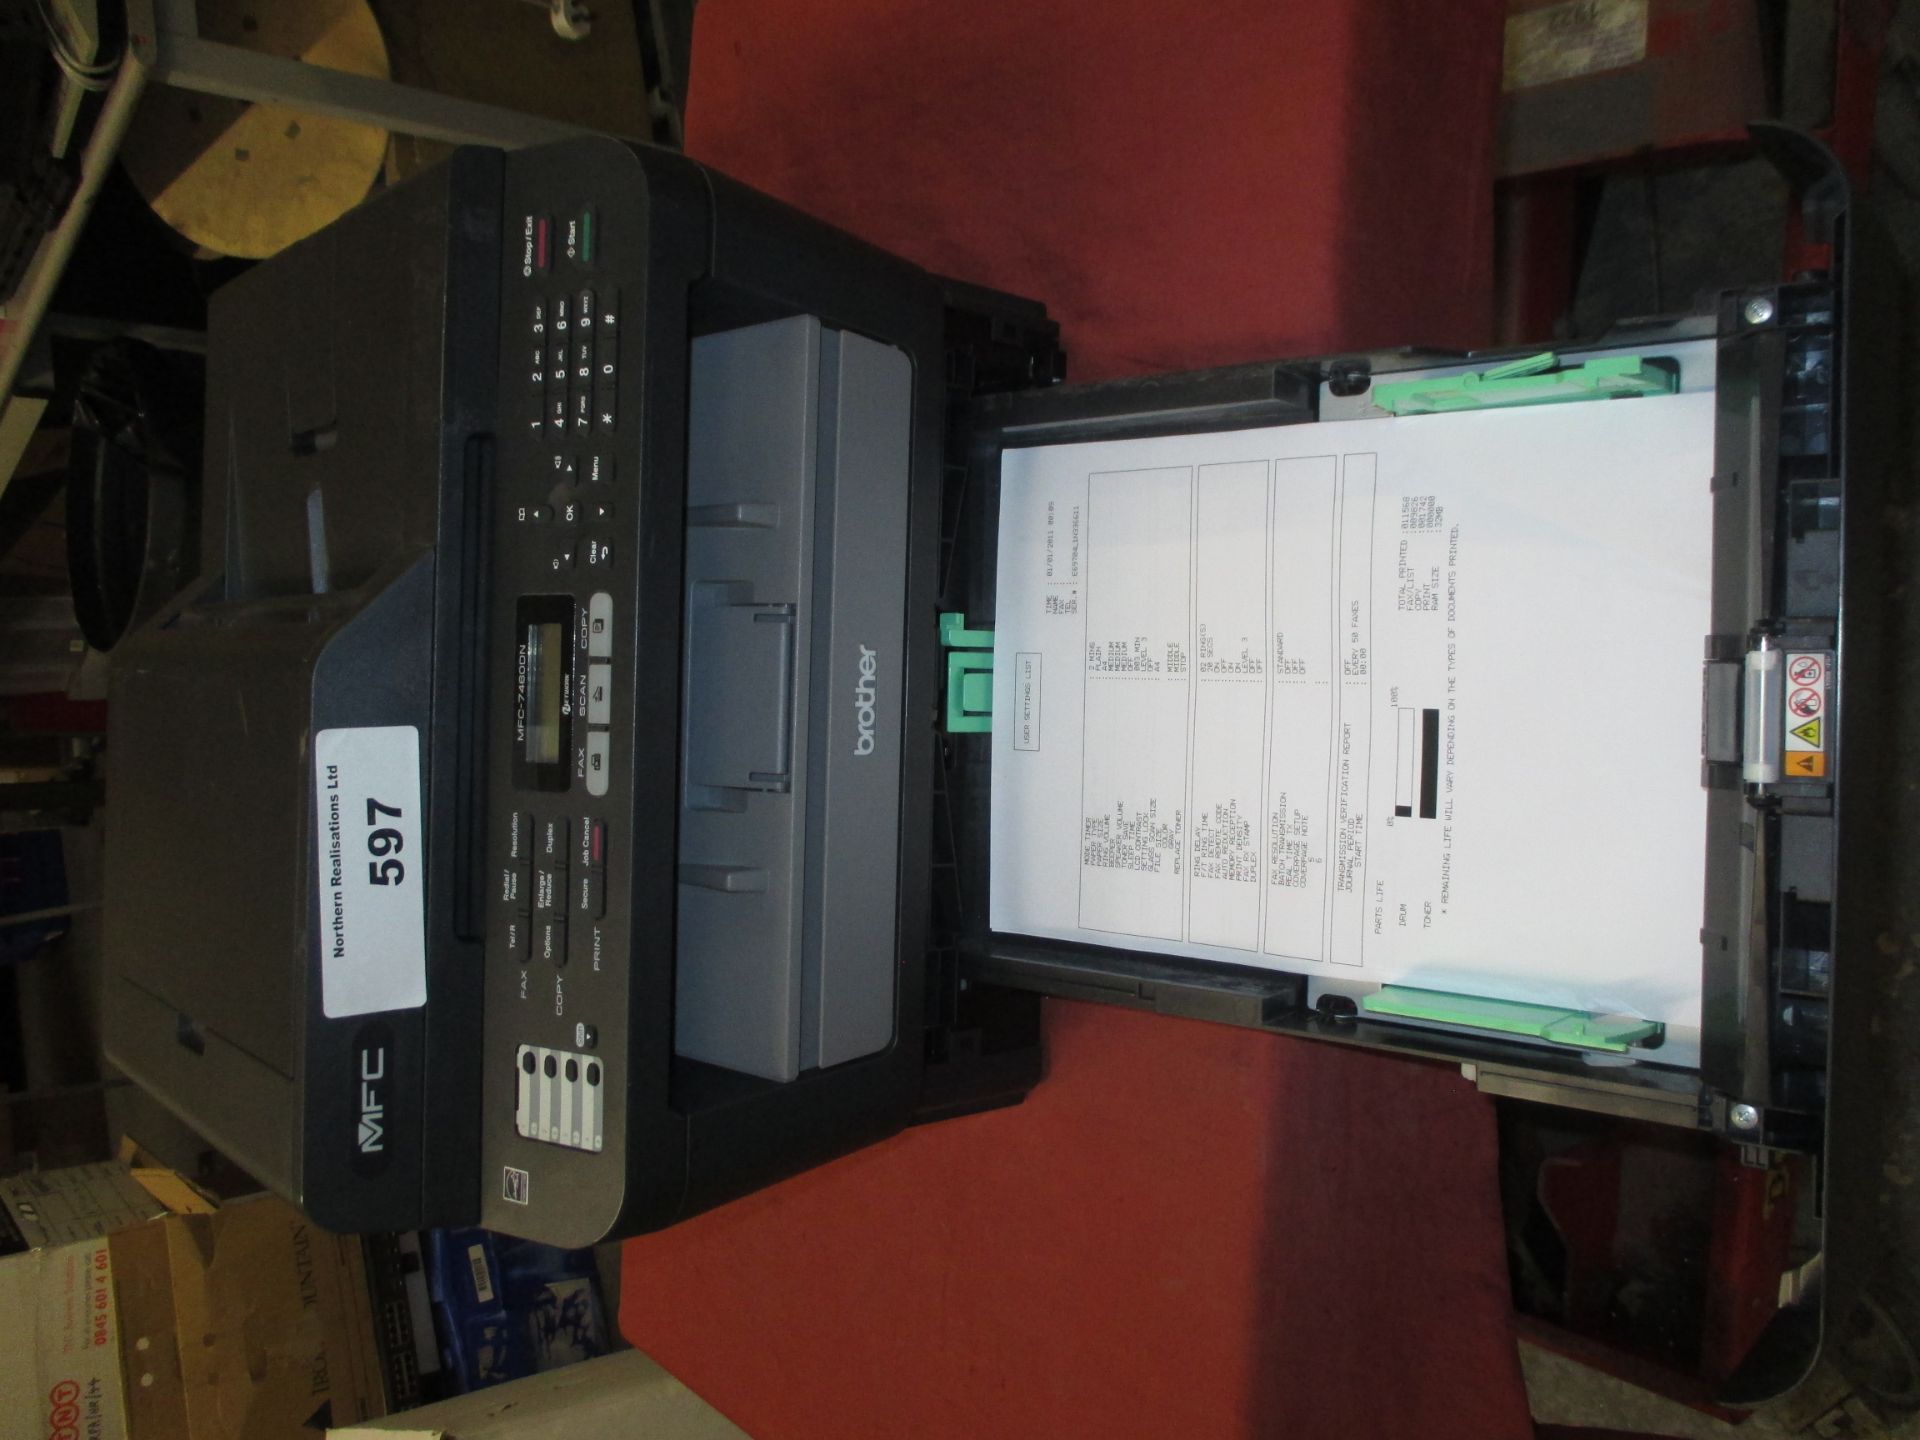 BROTHER MFC-7460DN ALL IN ONE LASER PRINTER, COPIER, SCANNER, FAX. WITH TEST PRINT - Image 2 of 2